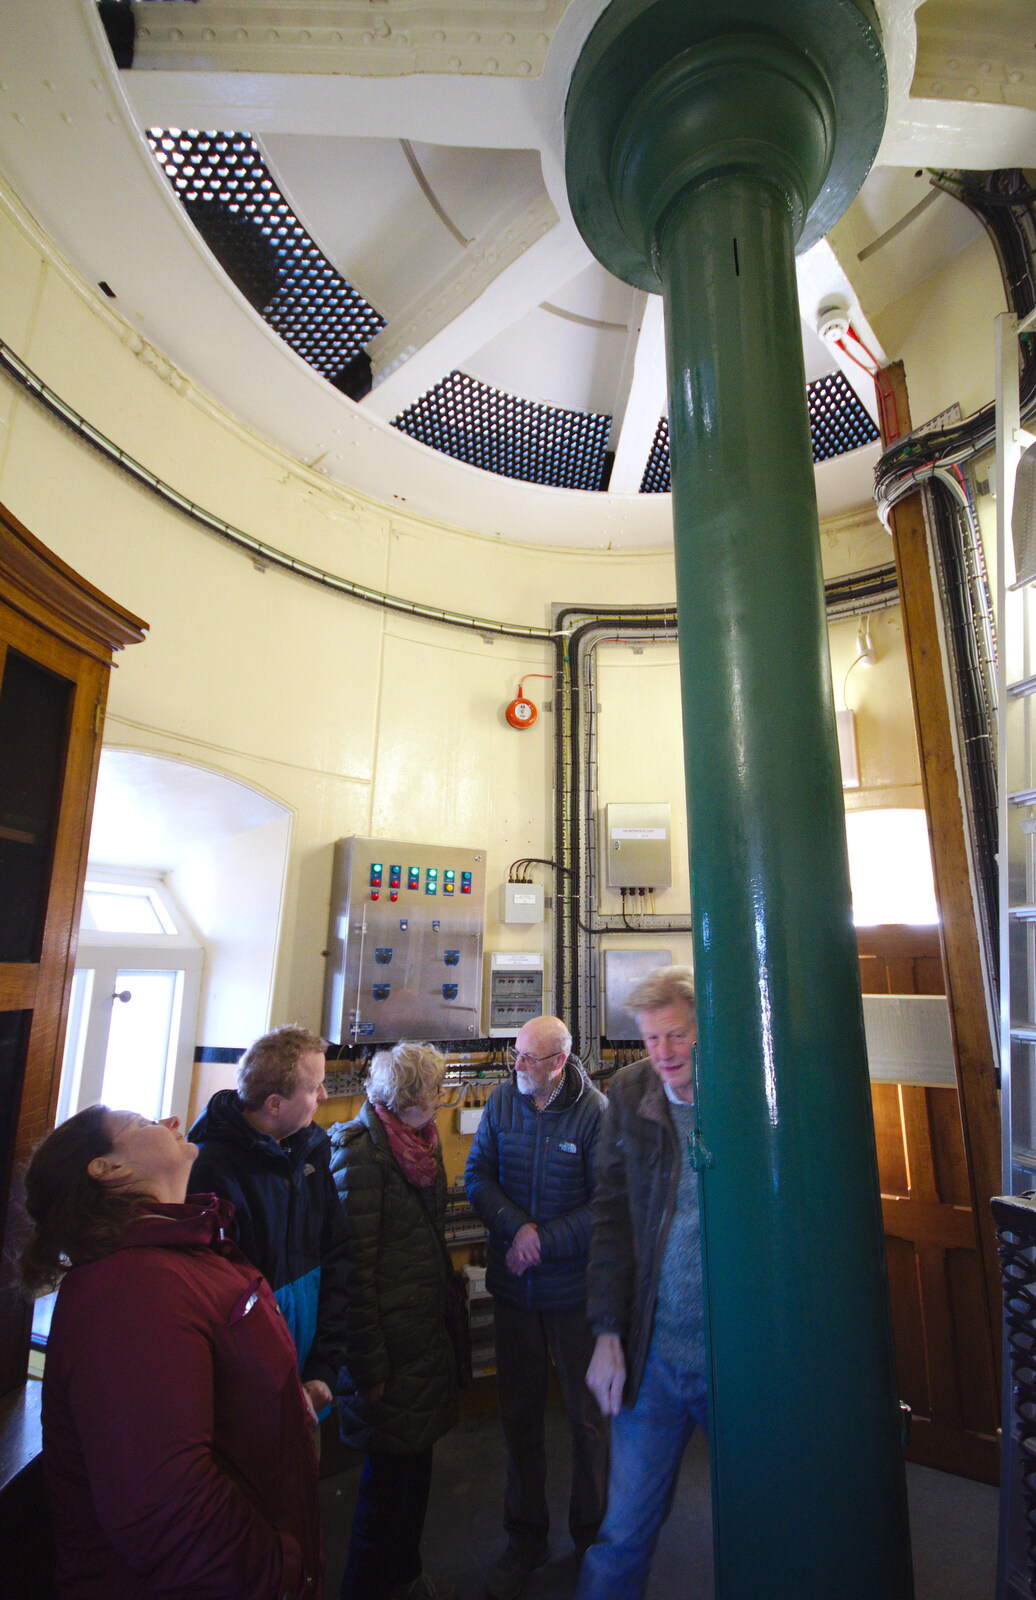 The tour group in the lighthouse from A Trip up a Lighthouse, Southwold, Suffolk - 27th October 2019